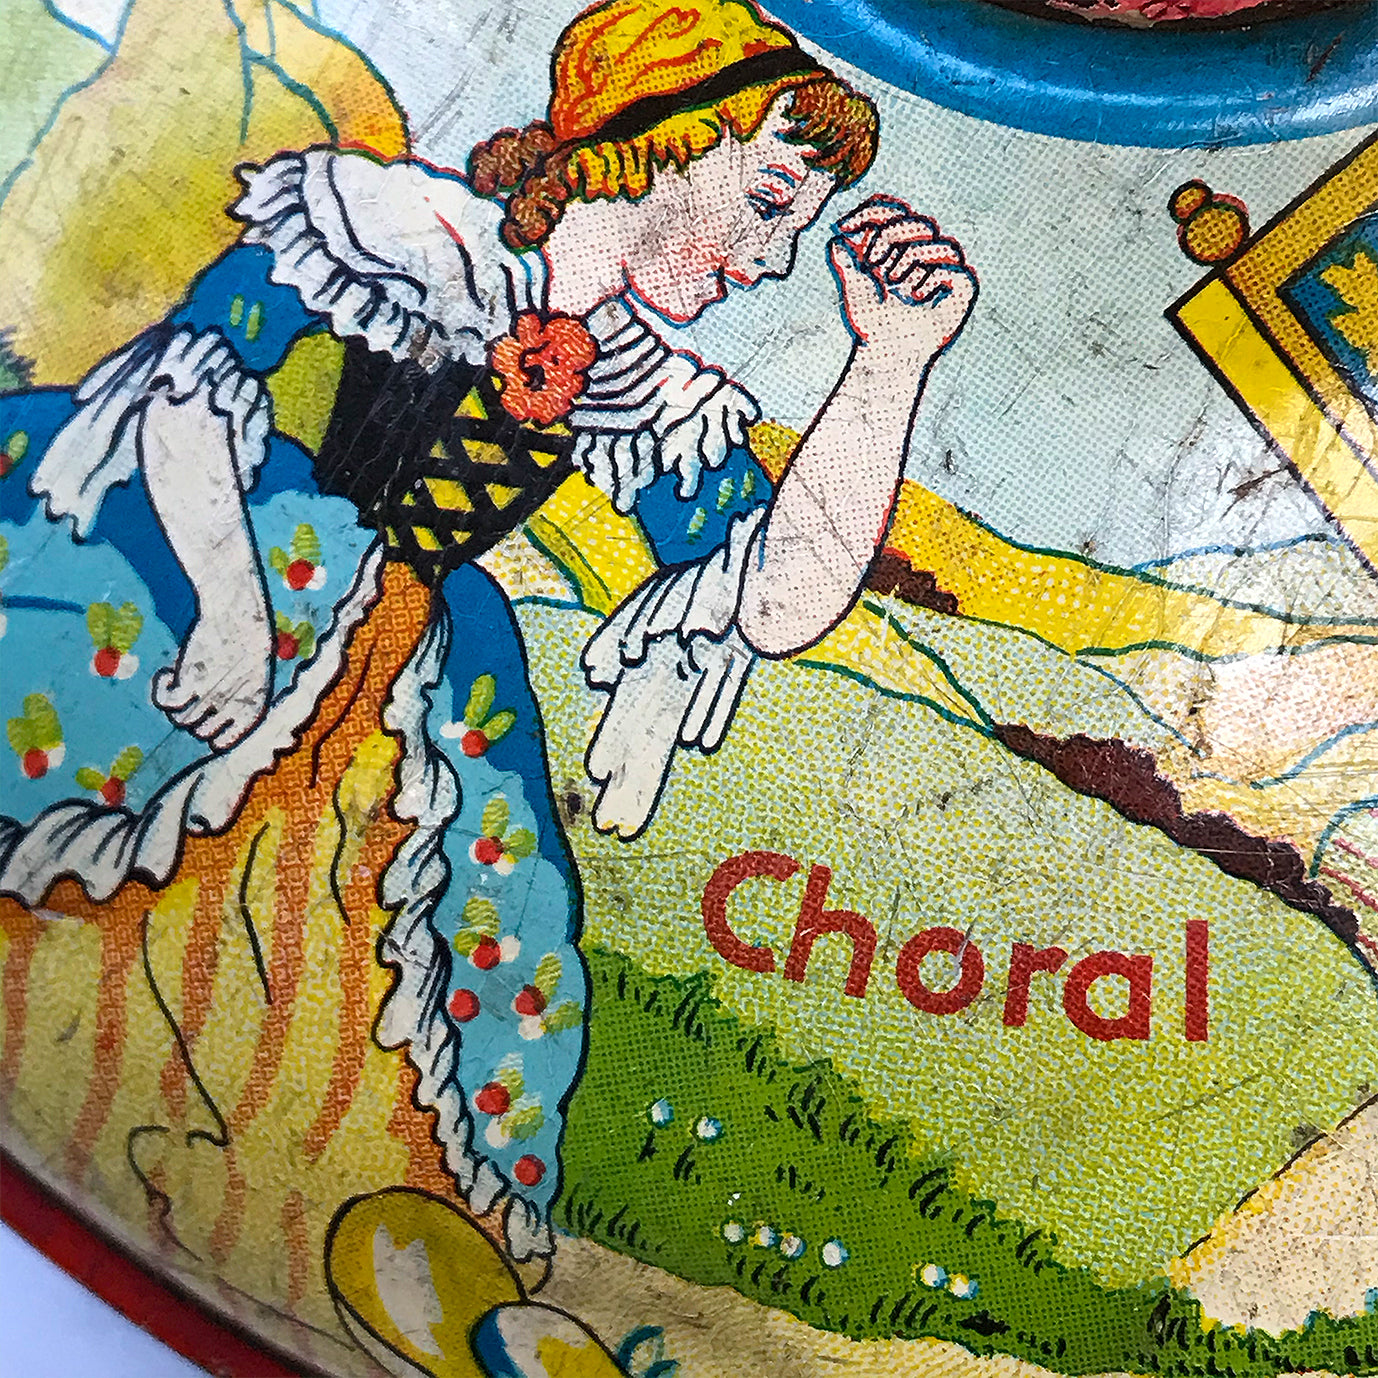 Colourful 1950's Tin Spinning Top covered in wonderful nursery rhyme illustrations Marked MFZ which stands for Michael Fuchs auf Zindorf. It was made in the U.S Zone, Germany - SHOP NOW - www.intovintage.co.uk